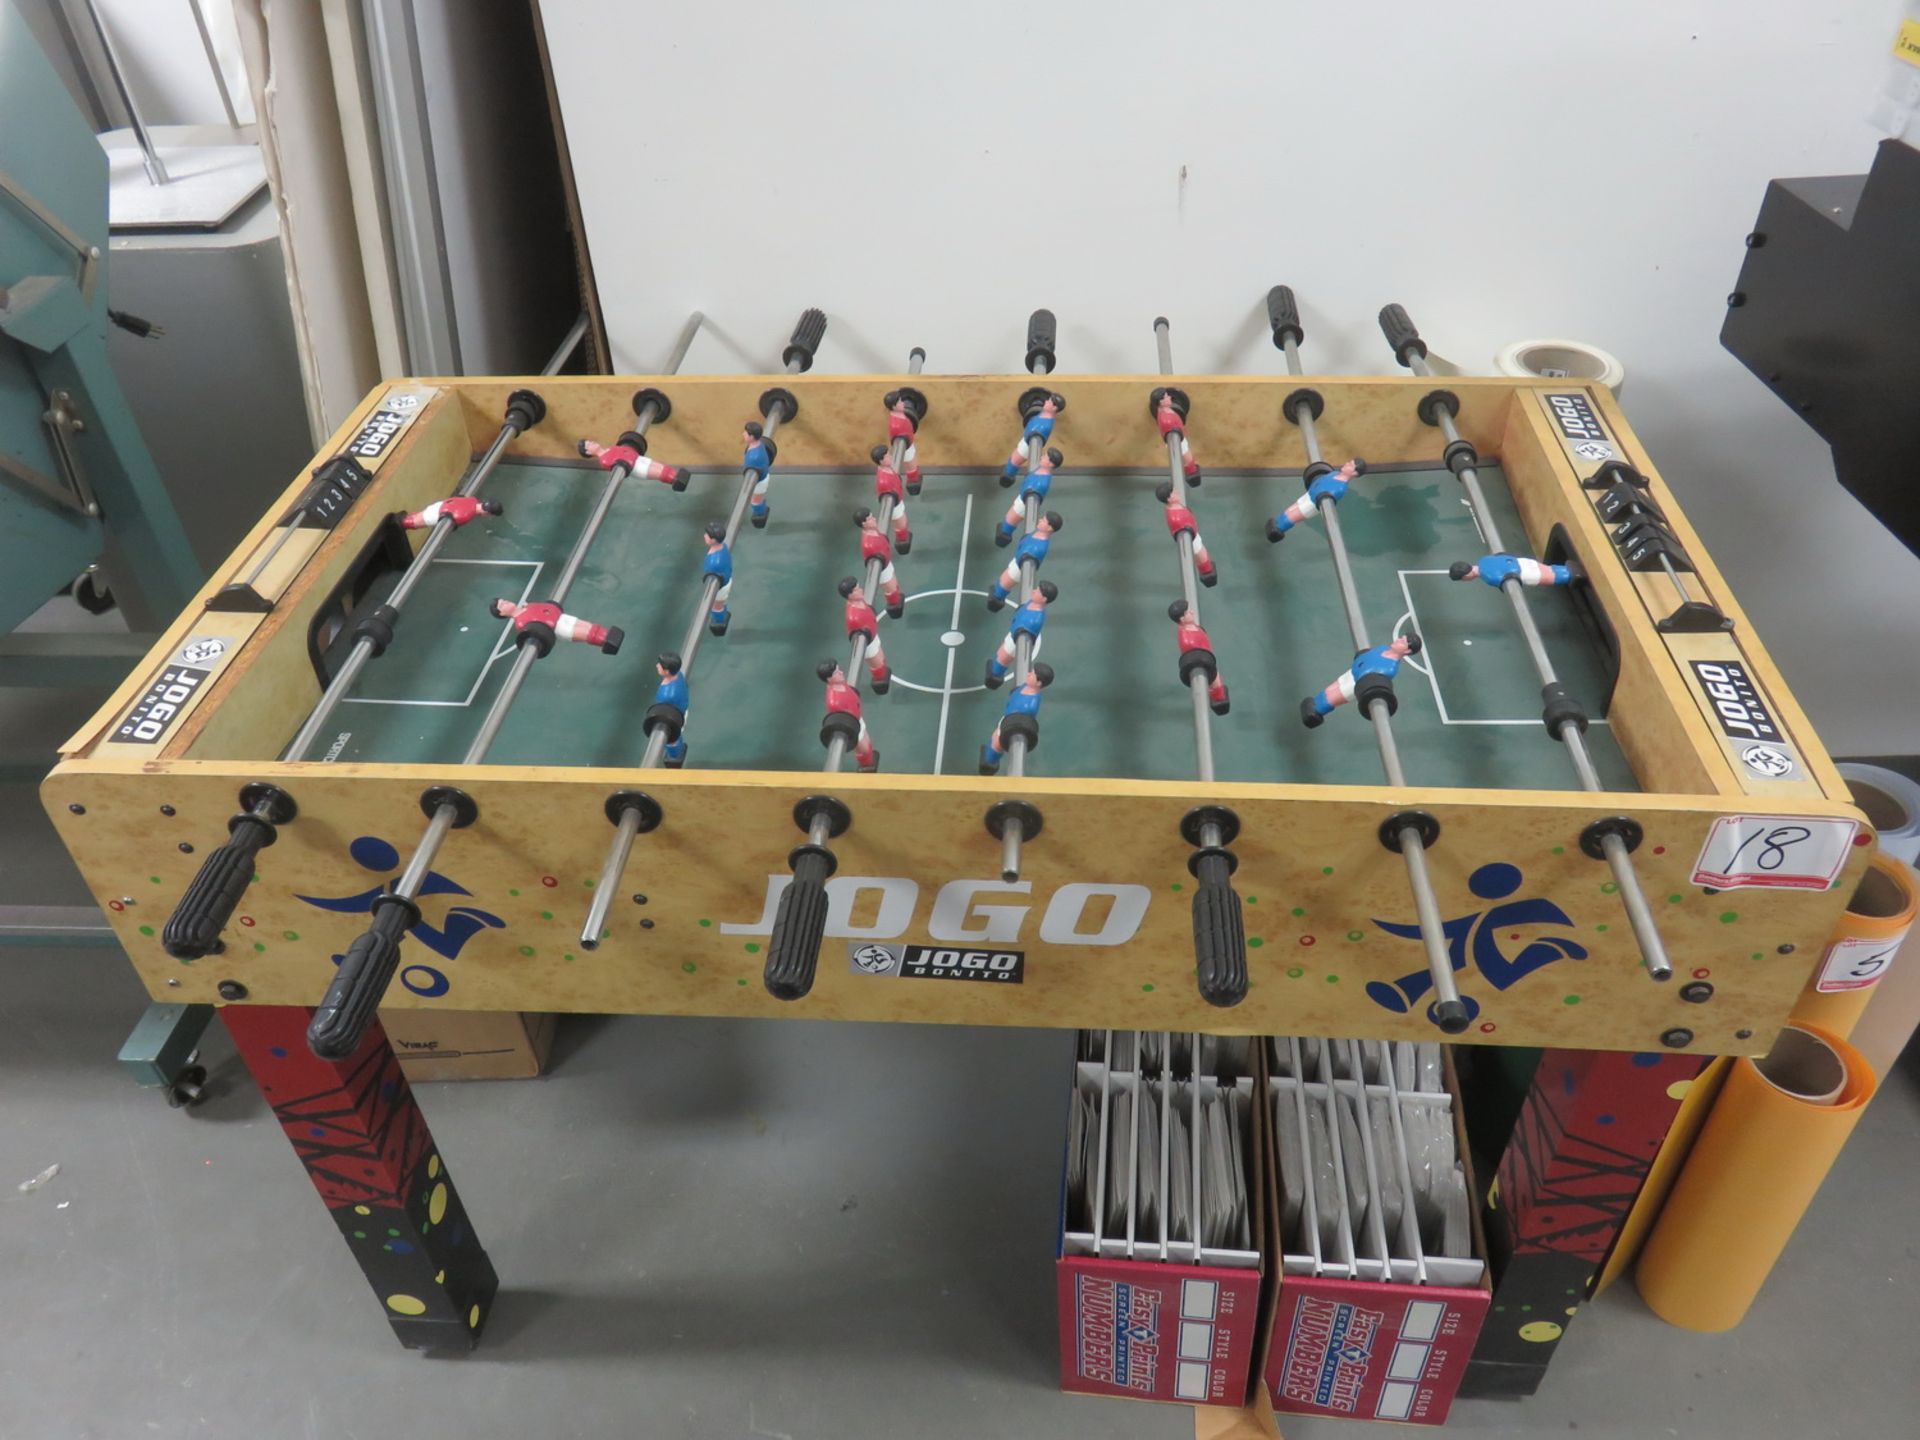 SPORT CRAFT FOOSBALL TABLE GAME (LOCATED @ 122 INDUSTRY DRIVE)